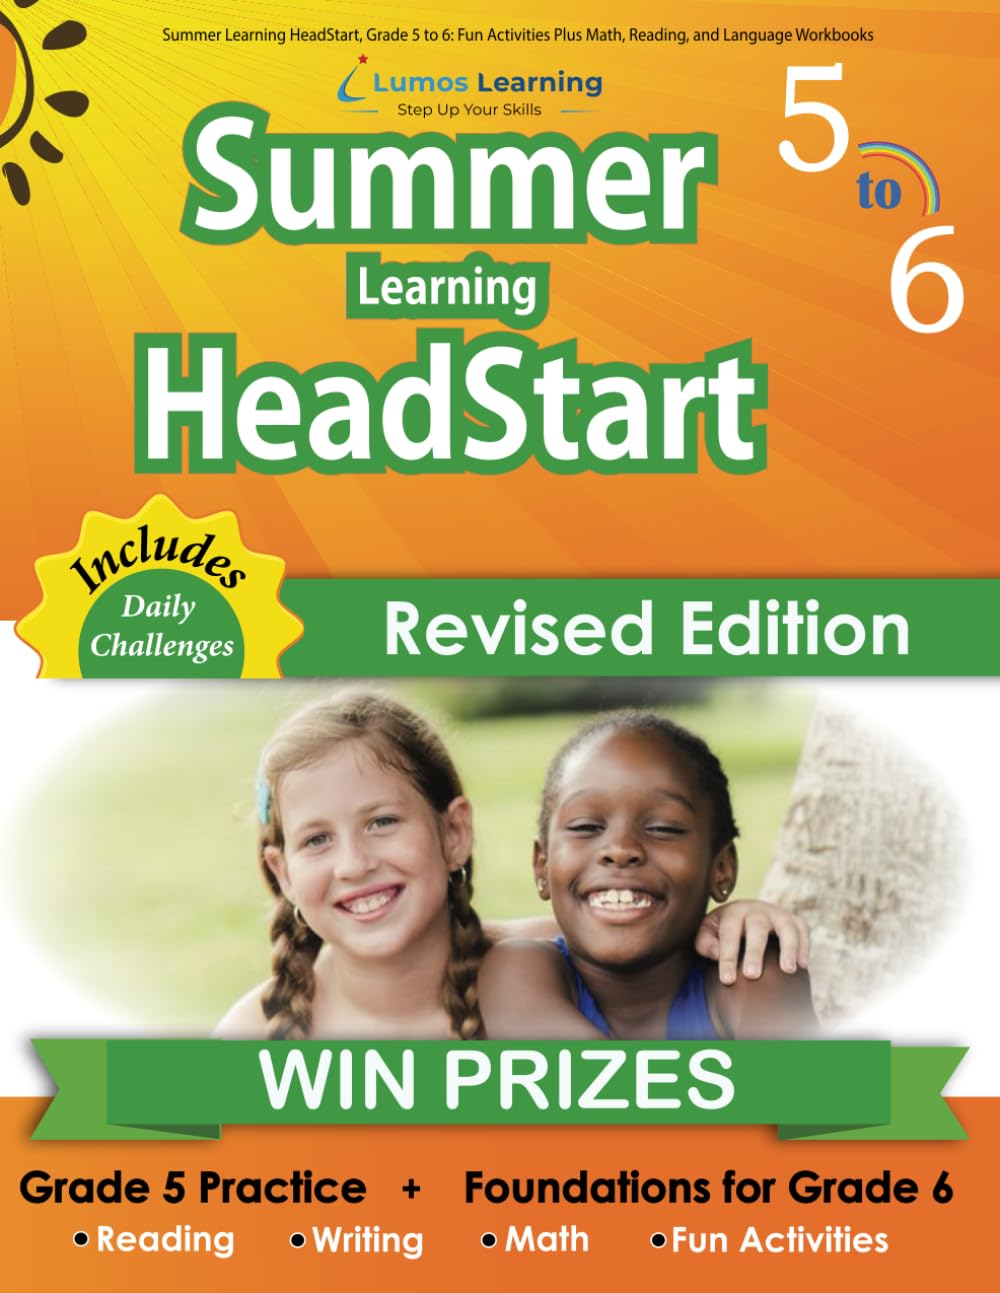 Summer Learning HeadStart, Grade 5 to 6: Fun Activities Plus Math, Reading, and Language Workbooks: Bridge to Success with Common Core Aligned Resourc by Summer Learning Headstart, Lumos